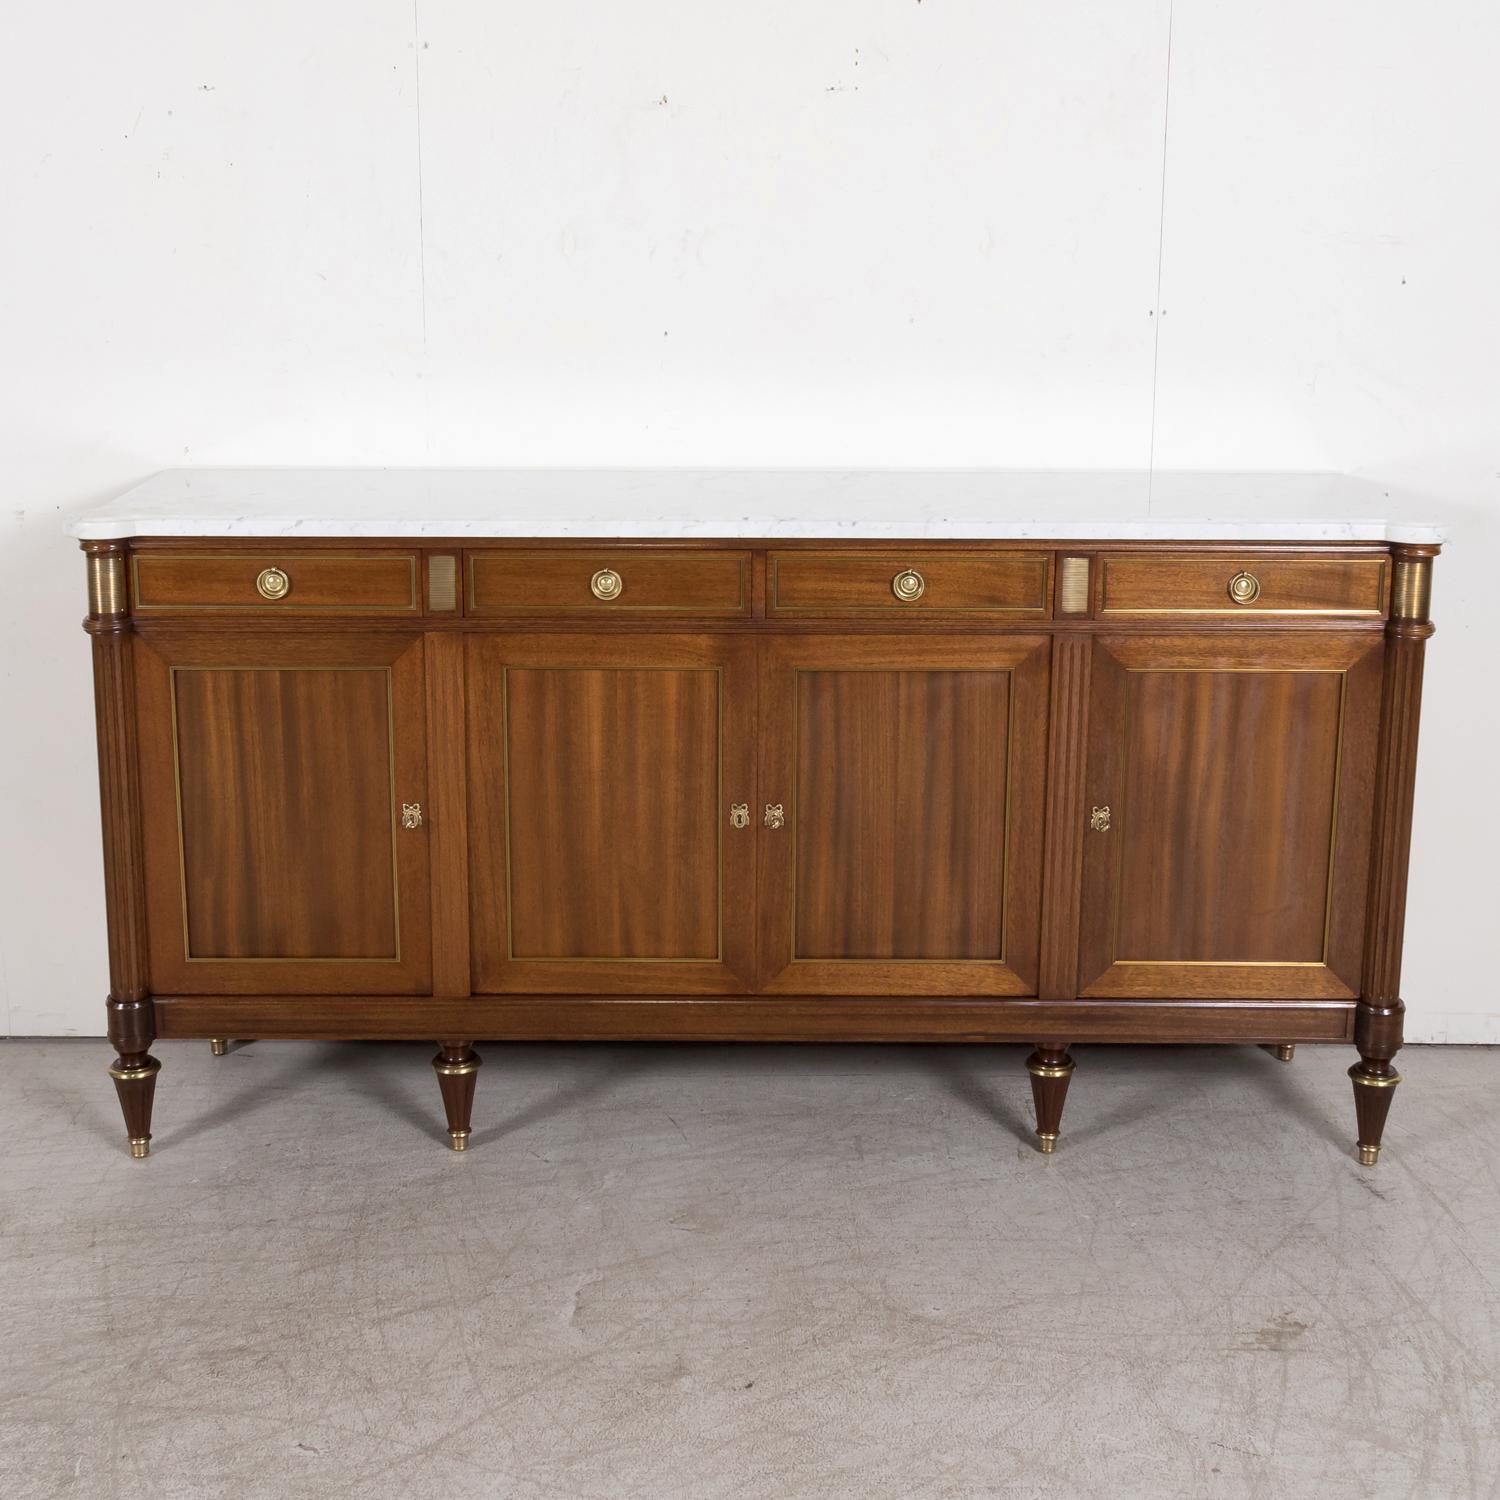 A beautiful early 20th century antique French Louis XVI style enfilade buffet handcrafted of mahogany by skilled artisans in Paris, circa 1920s, having a moulded edge white Carrara marble top with cookie cutter corners above four drawers over four